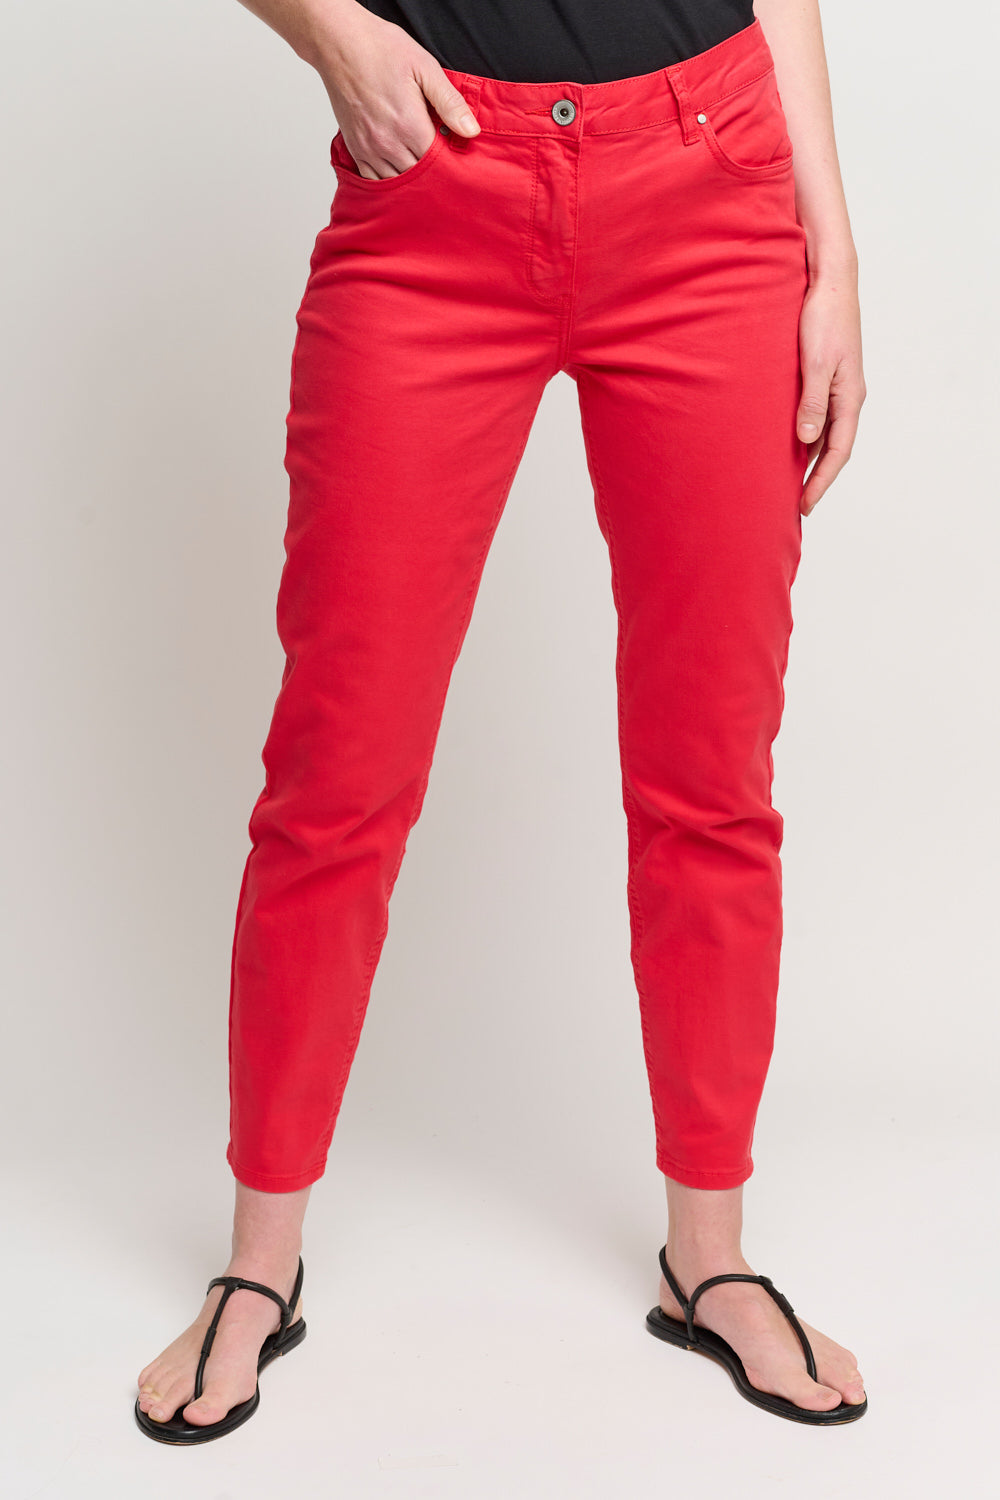 Jeans 7/8 - Poinsettia Red